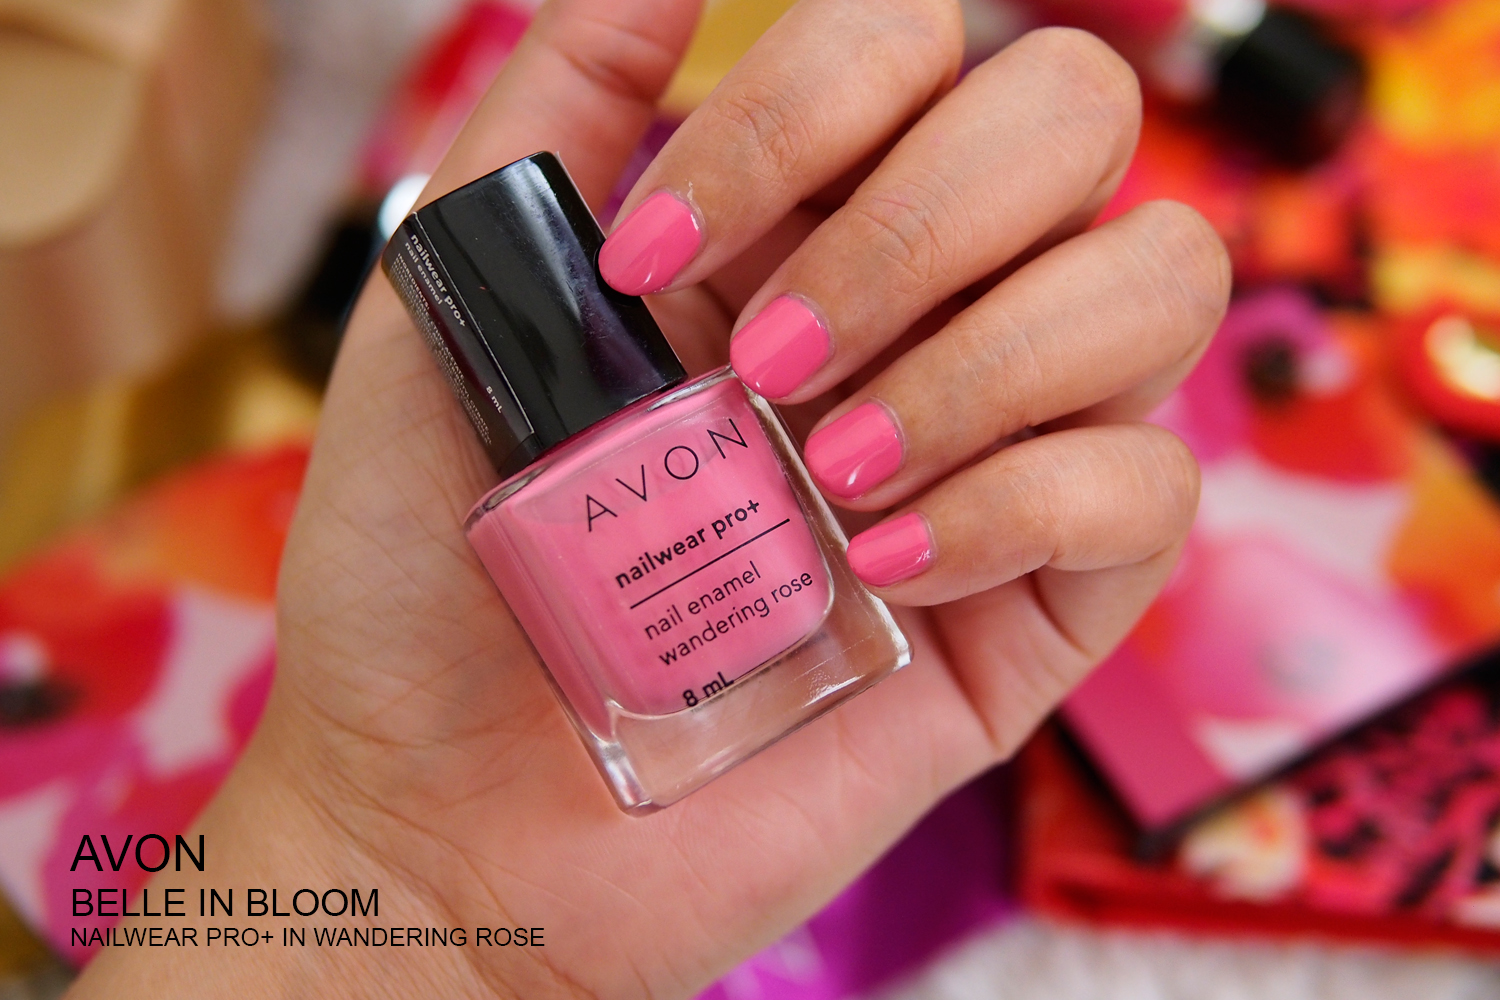 AVON BELLE IN BLOOM COLLECTION NAILS